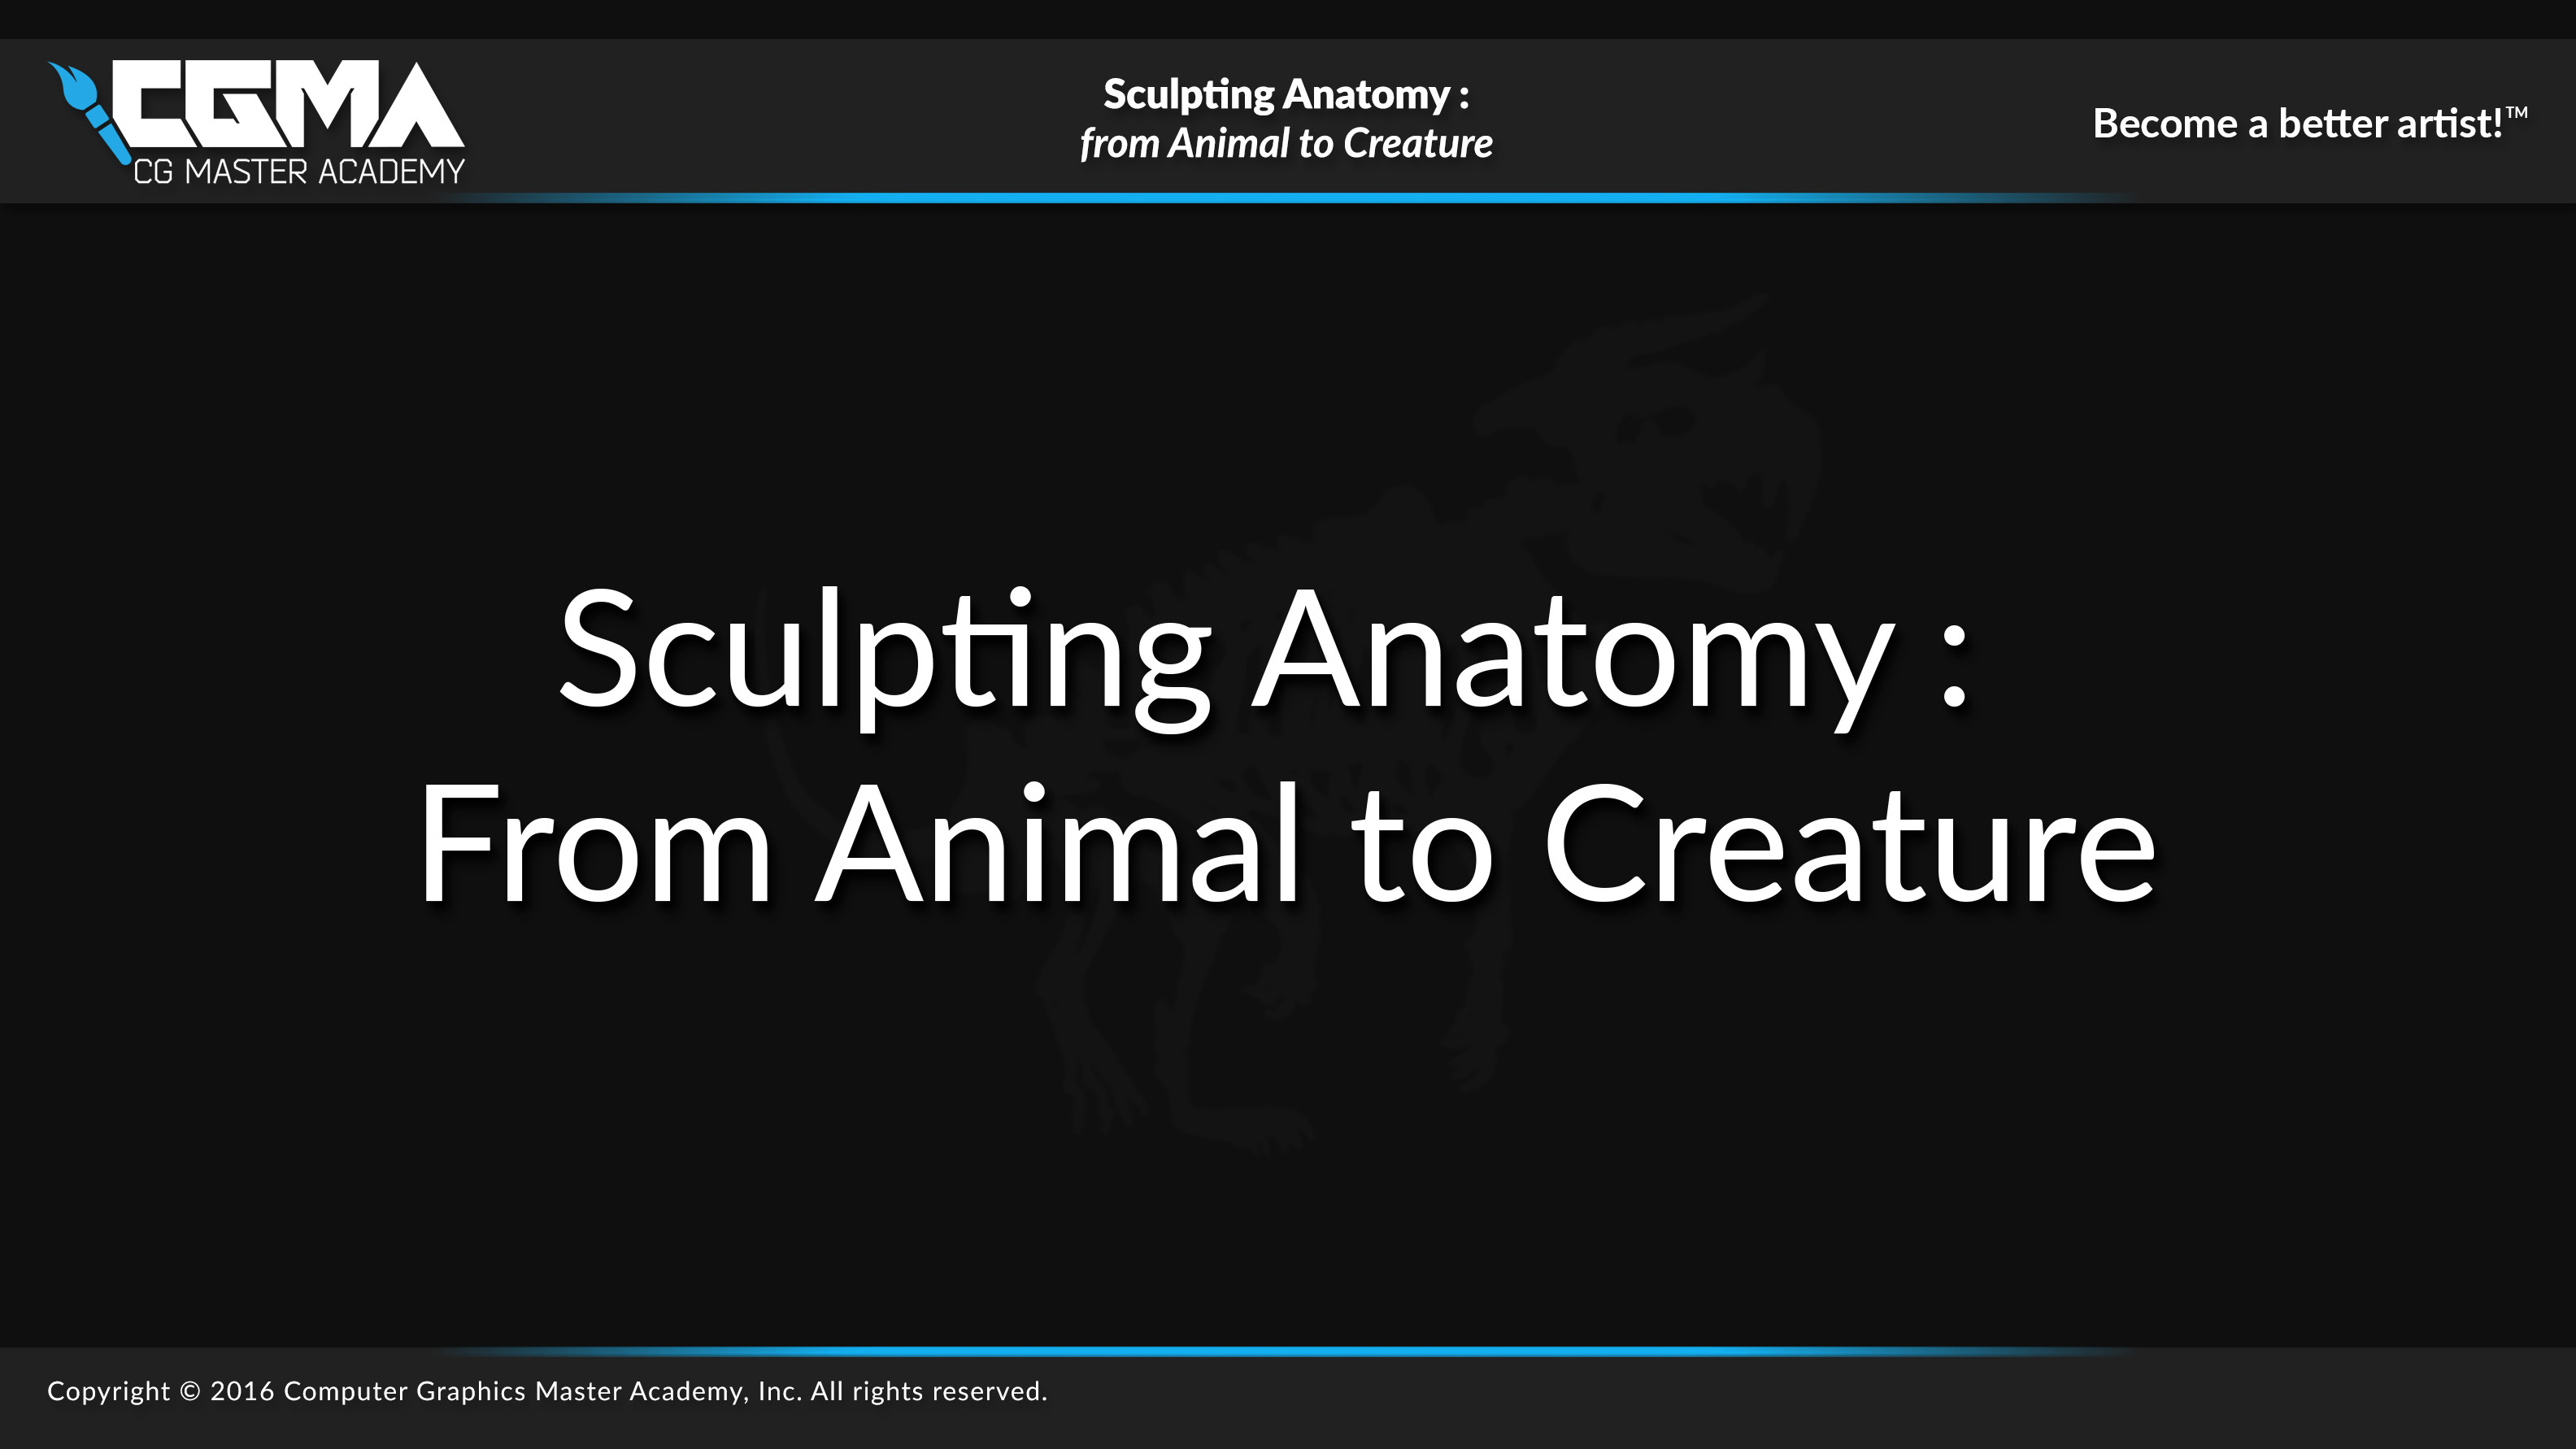 Full lecture available at CG Master Academy :
https://3dclassroom.cgmasteracademy.com/elective/2108